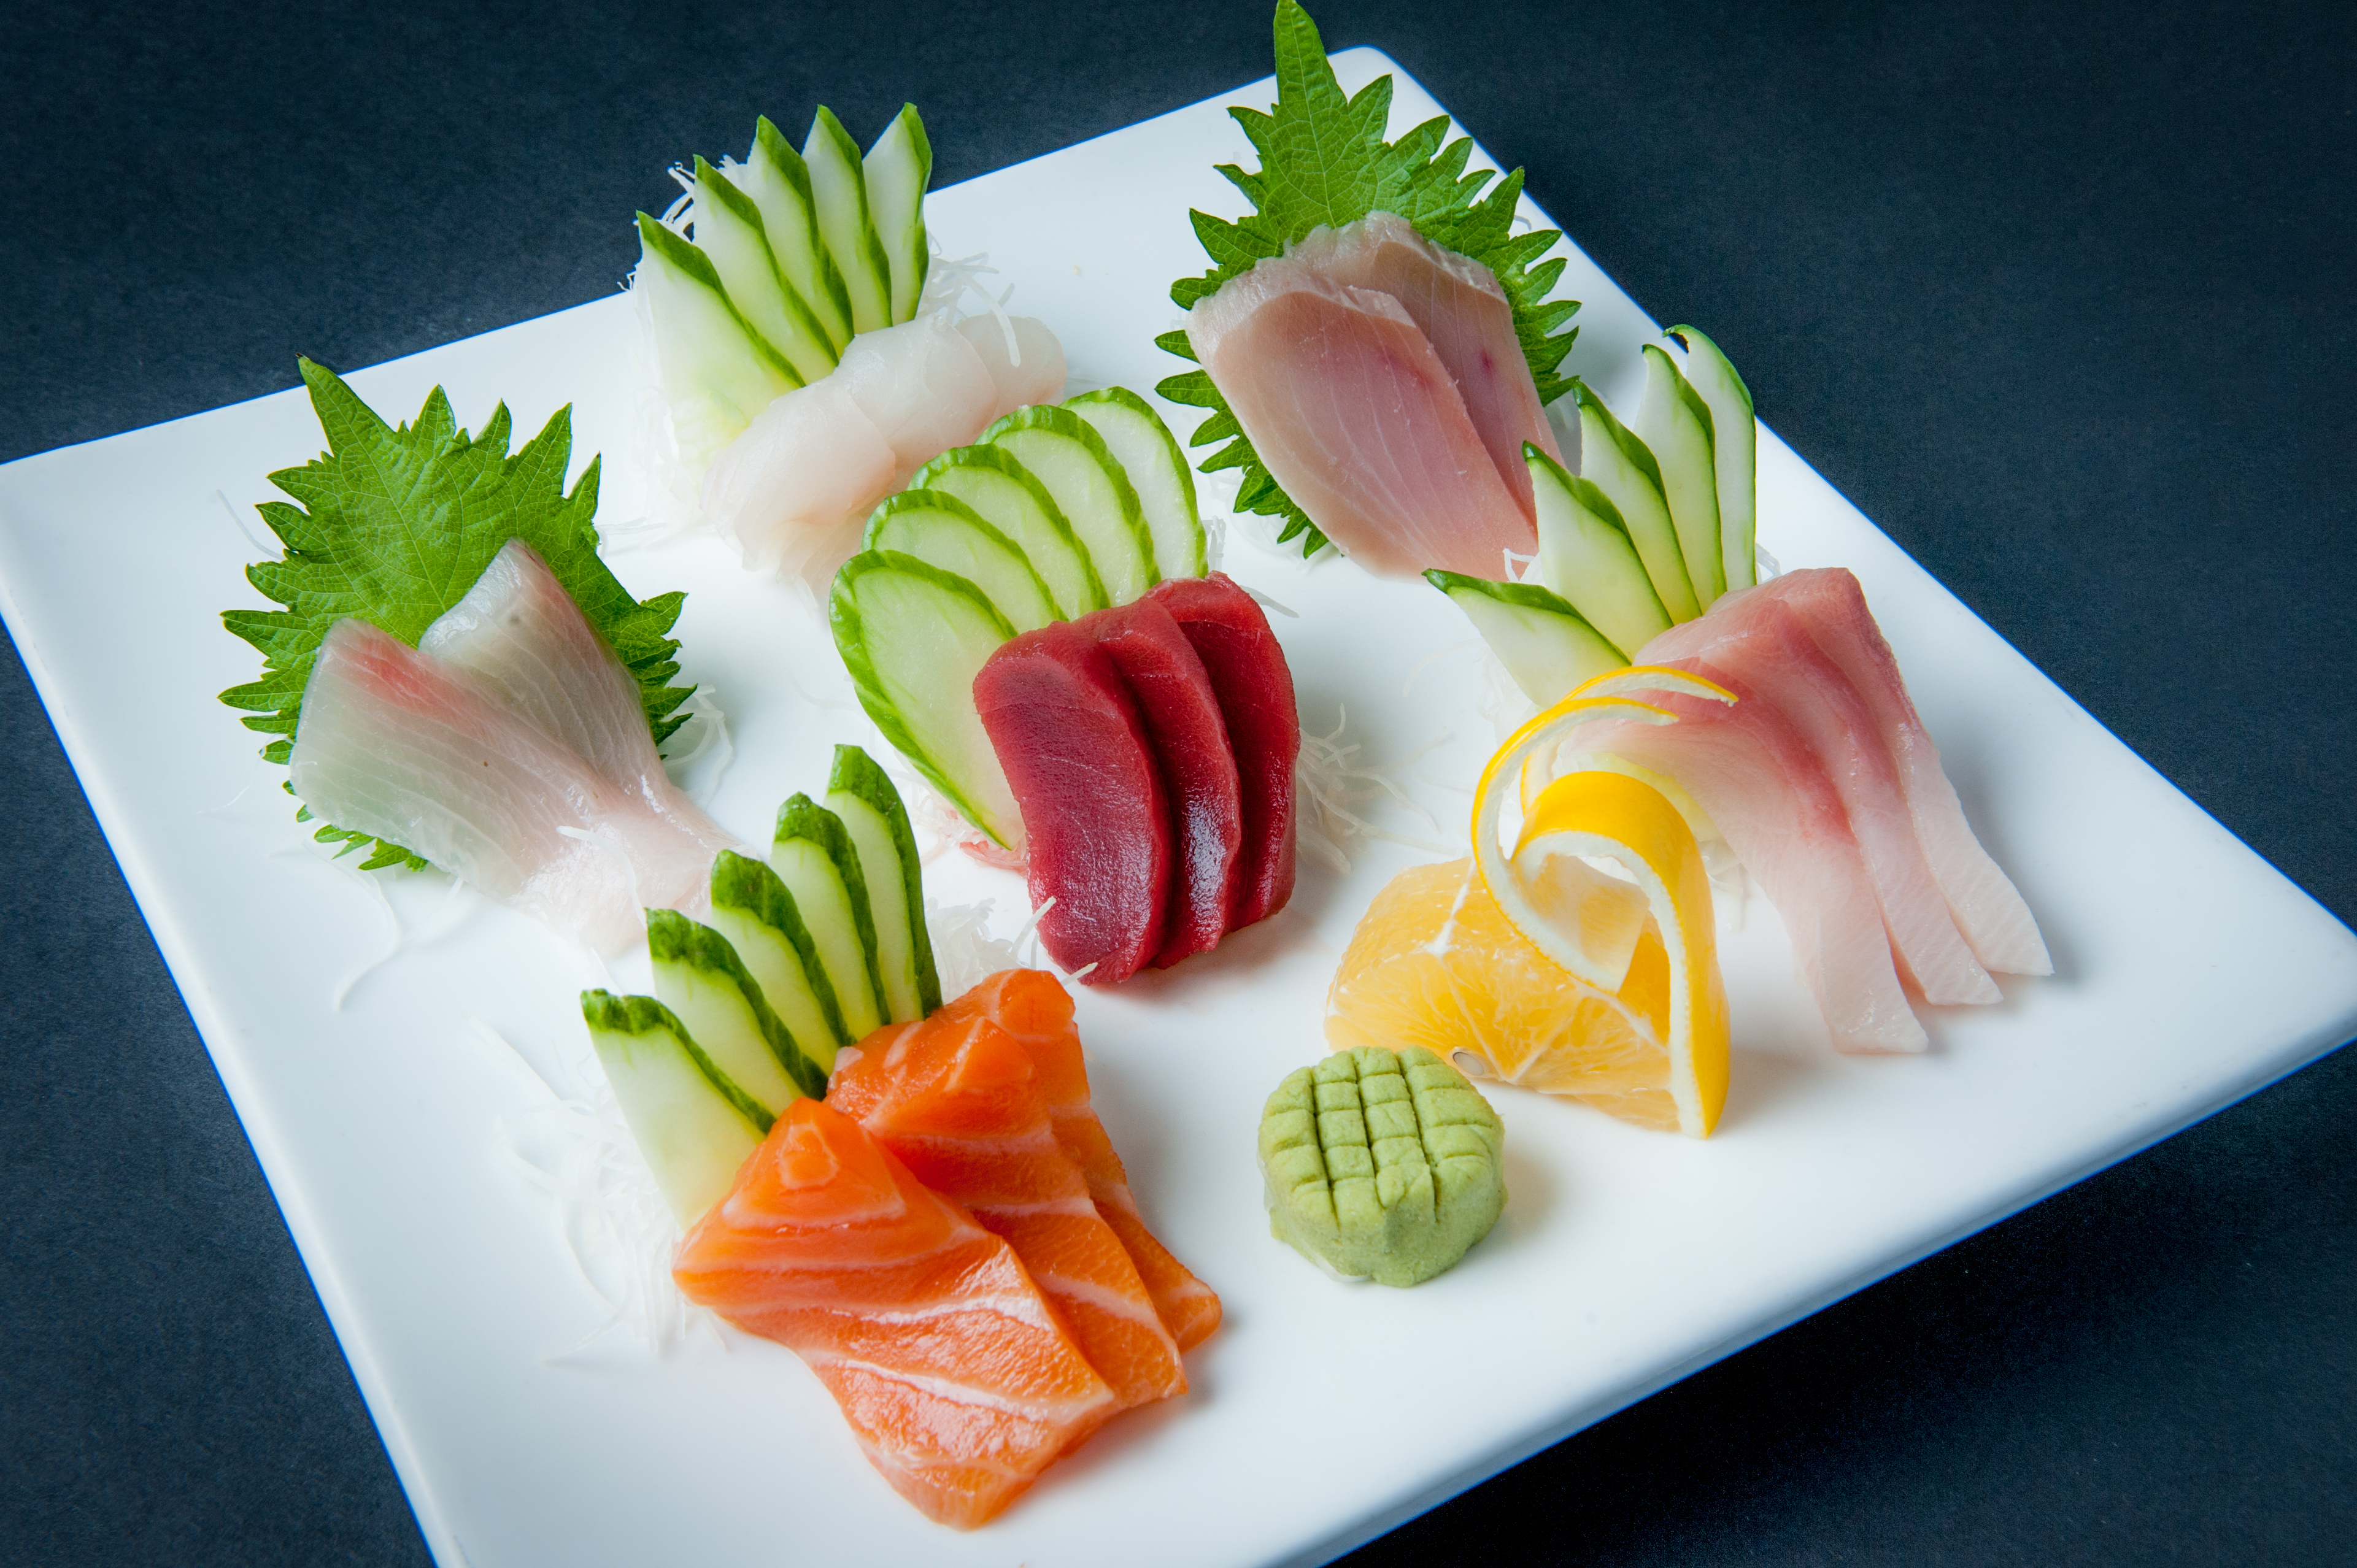 Which ingredient is not commonly used in sushi and sashimi?